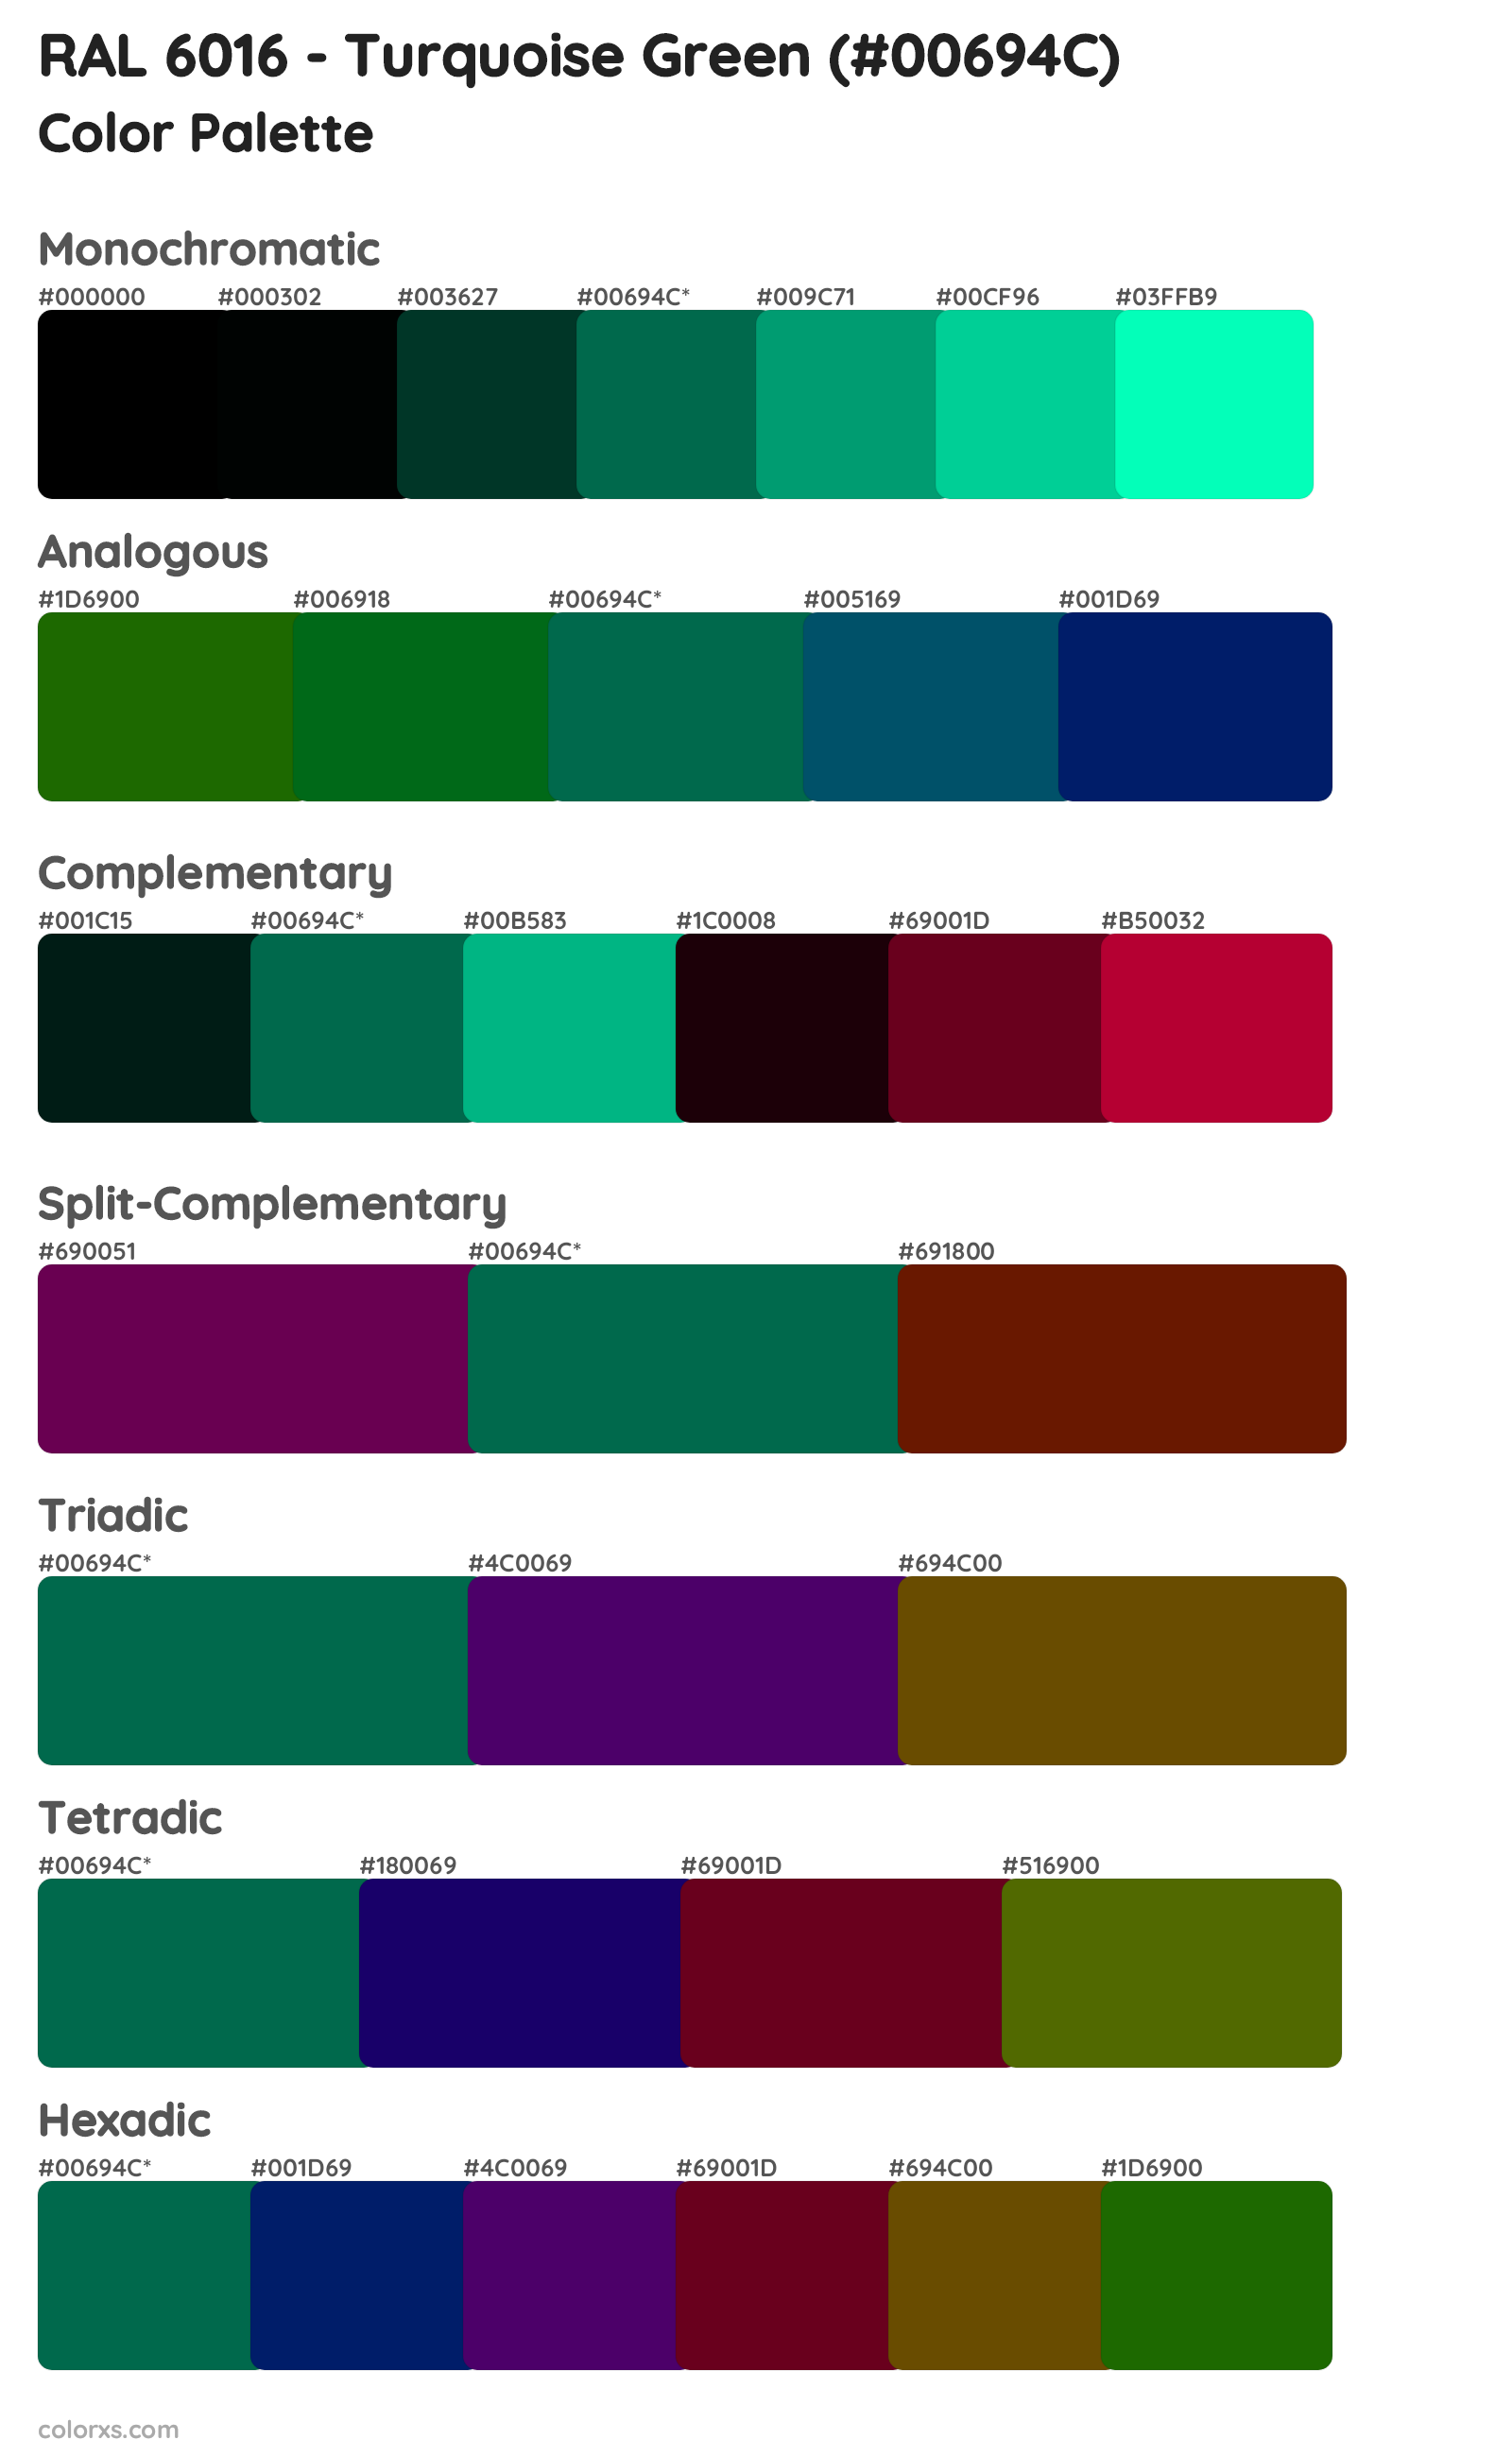 RAL 6016 - Turquoise Green Color Scheme Palettes